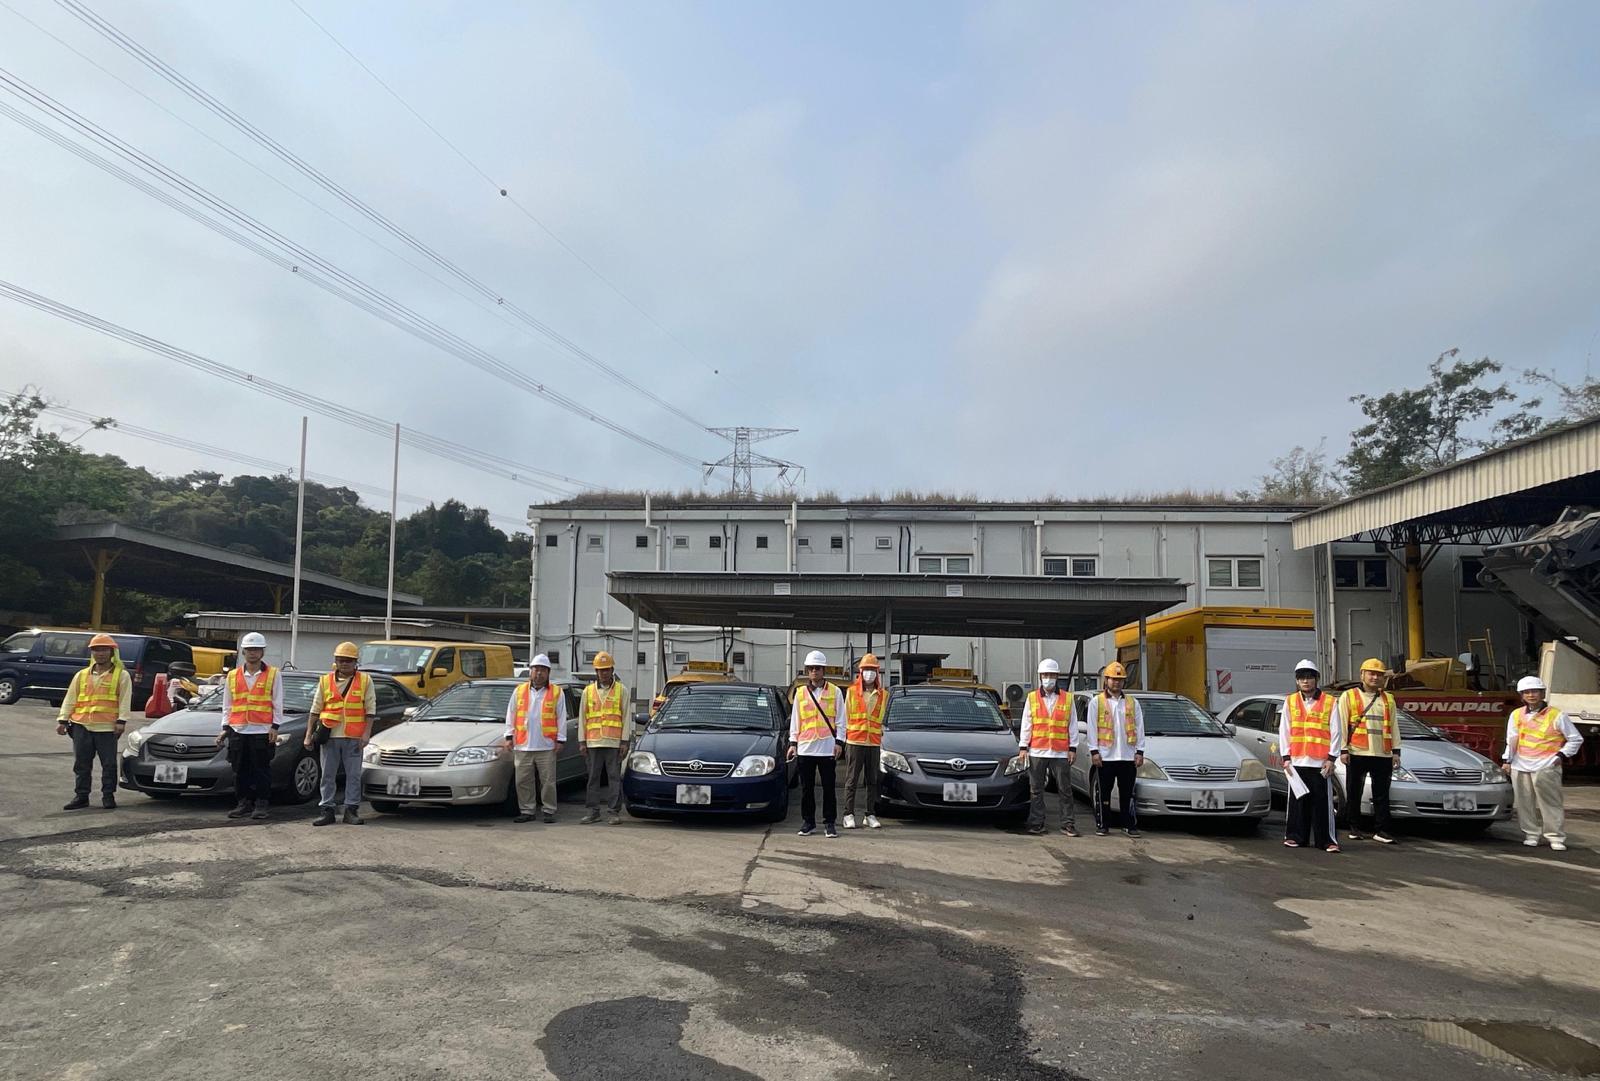 The Emergency Control Centres of the Highways Department (HyD) today (March 17) conducted a drill to enhance the capability to cope with inclement weather. Photo shows staff members of the HyD and a contractor making final preparations before starting road patrol operations during the drill.